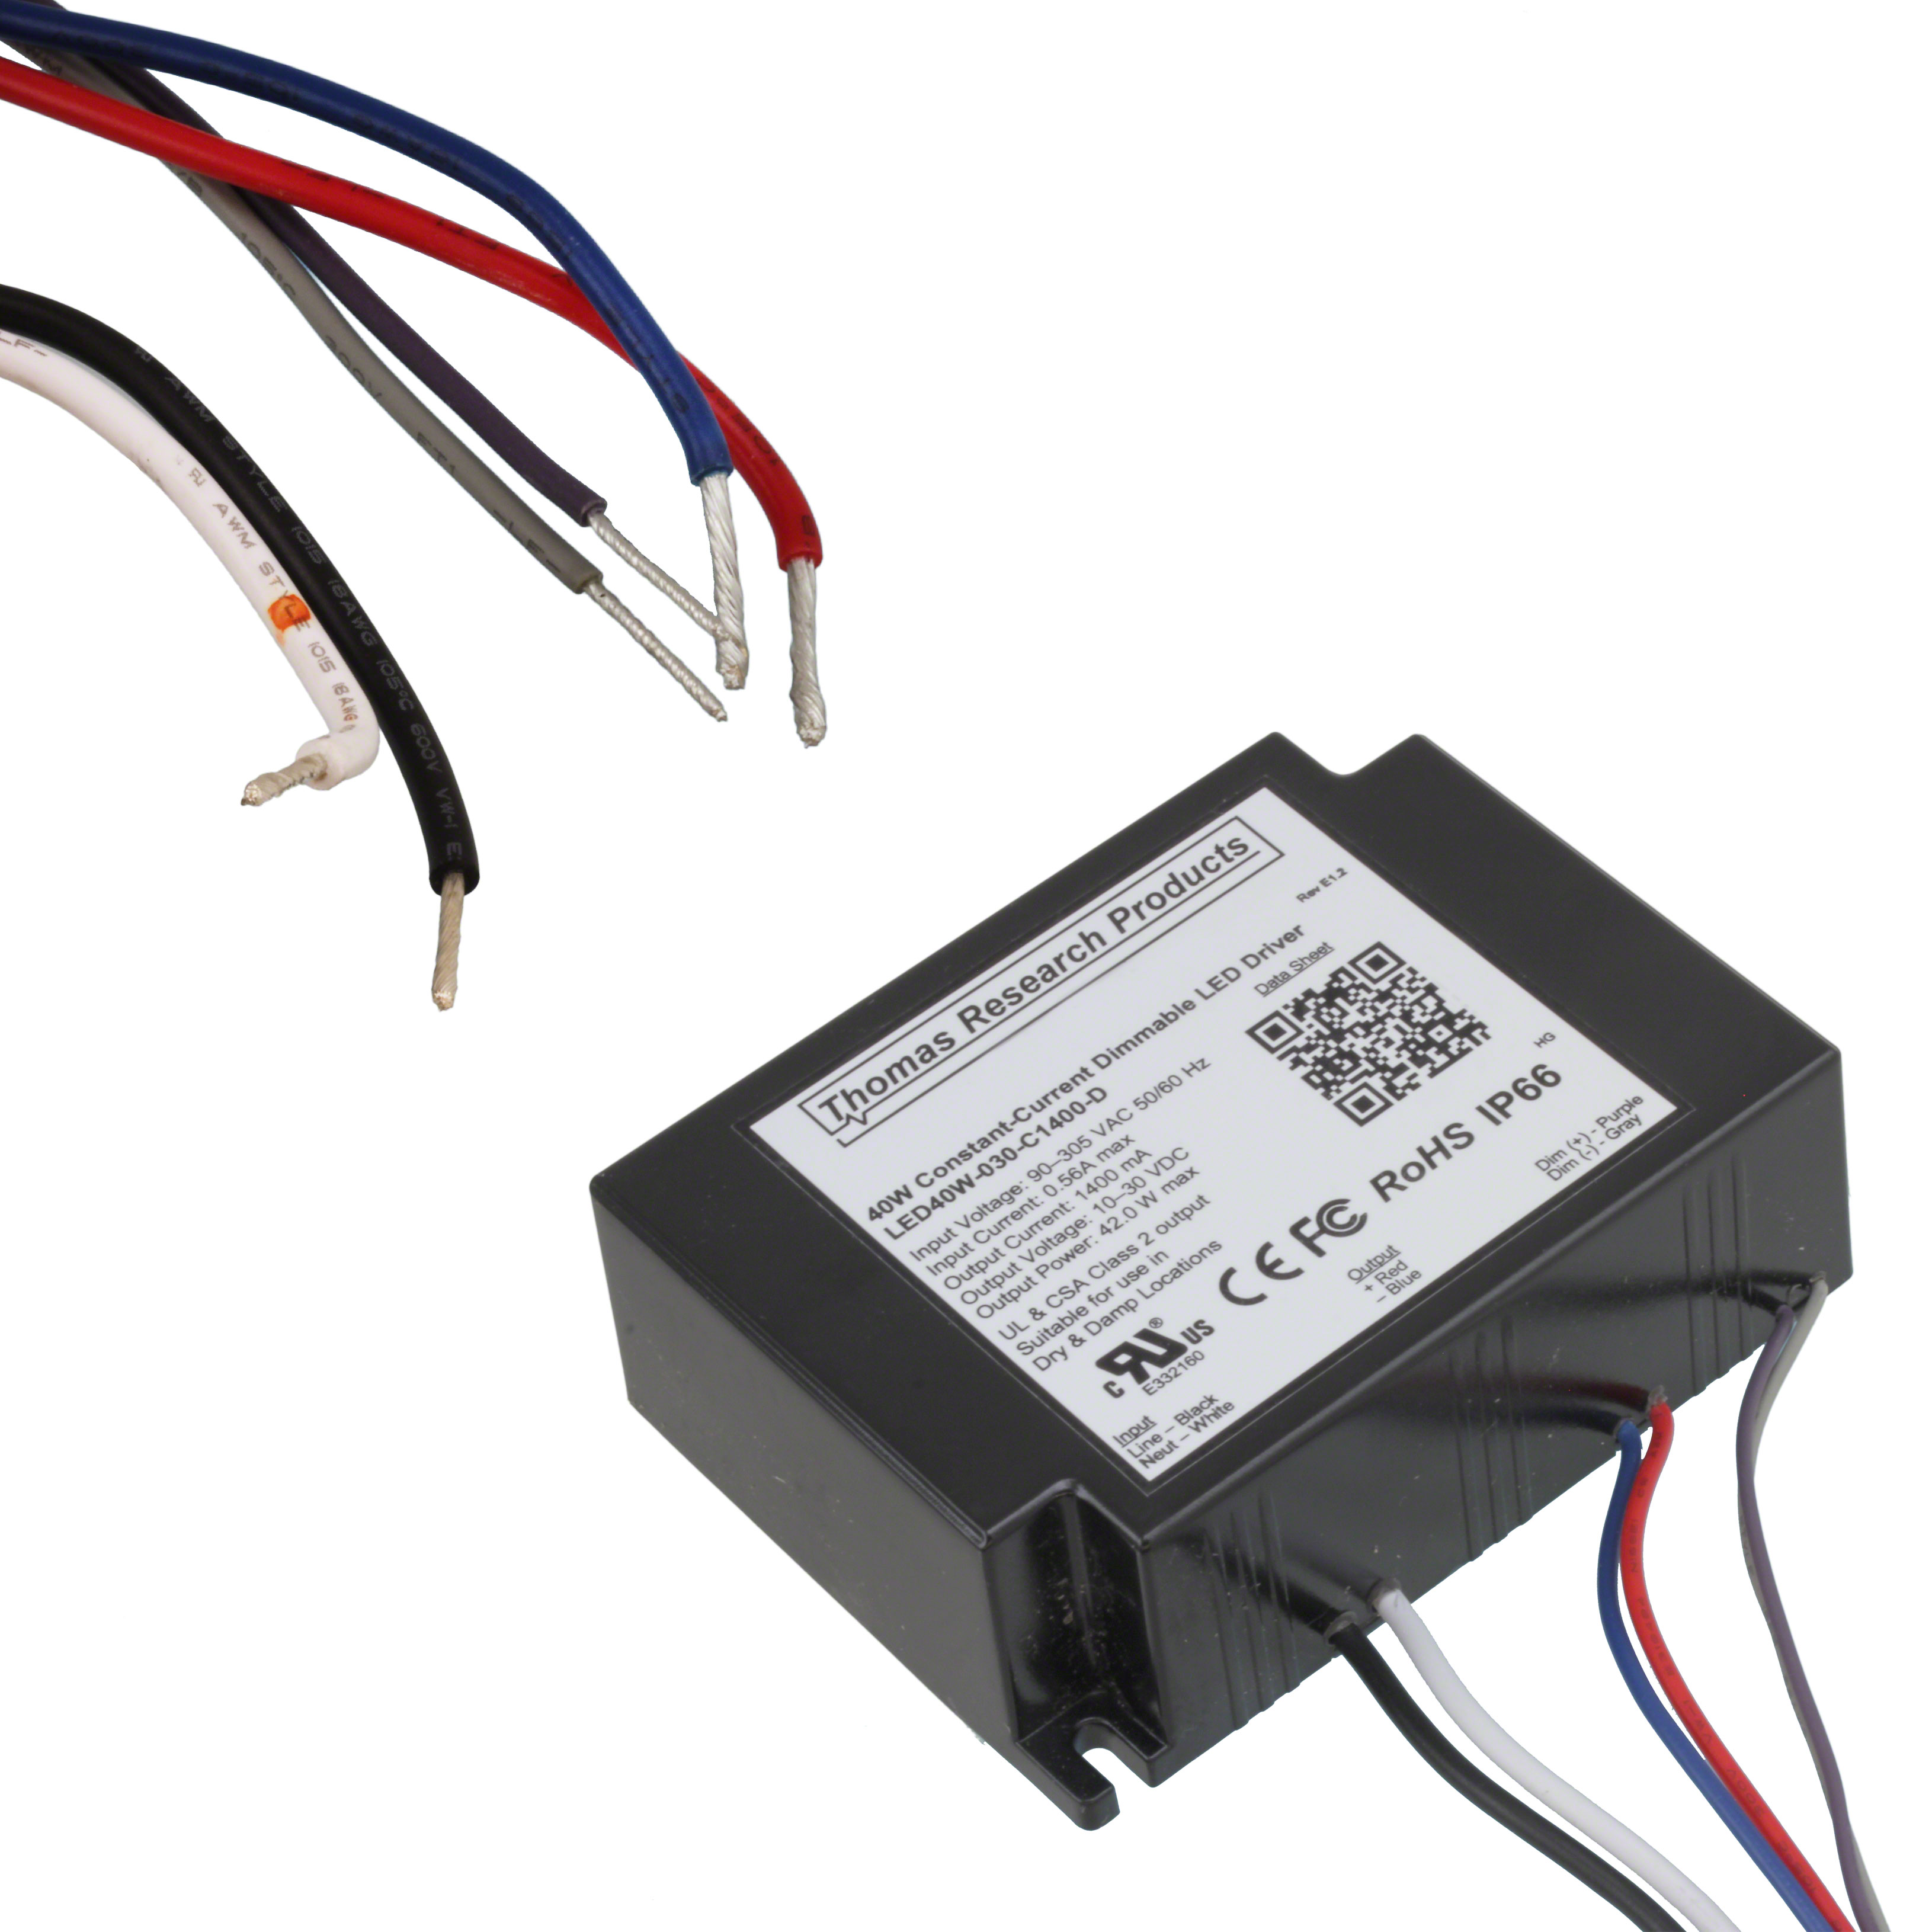 the part number is LED40W-030-C1400-D